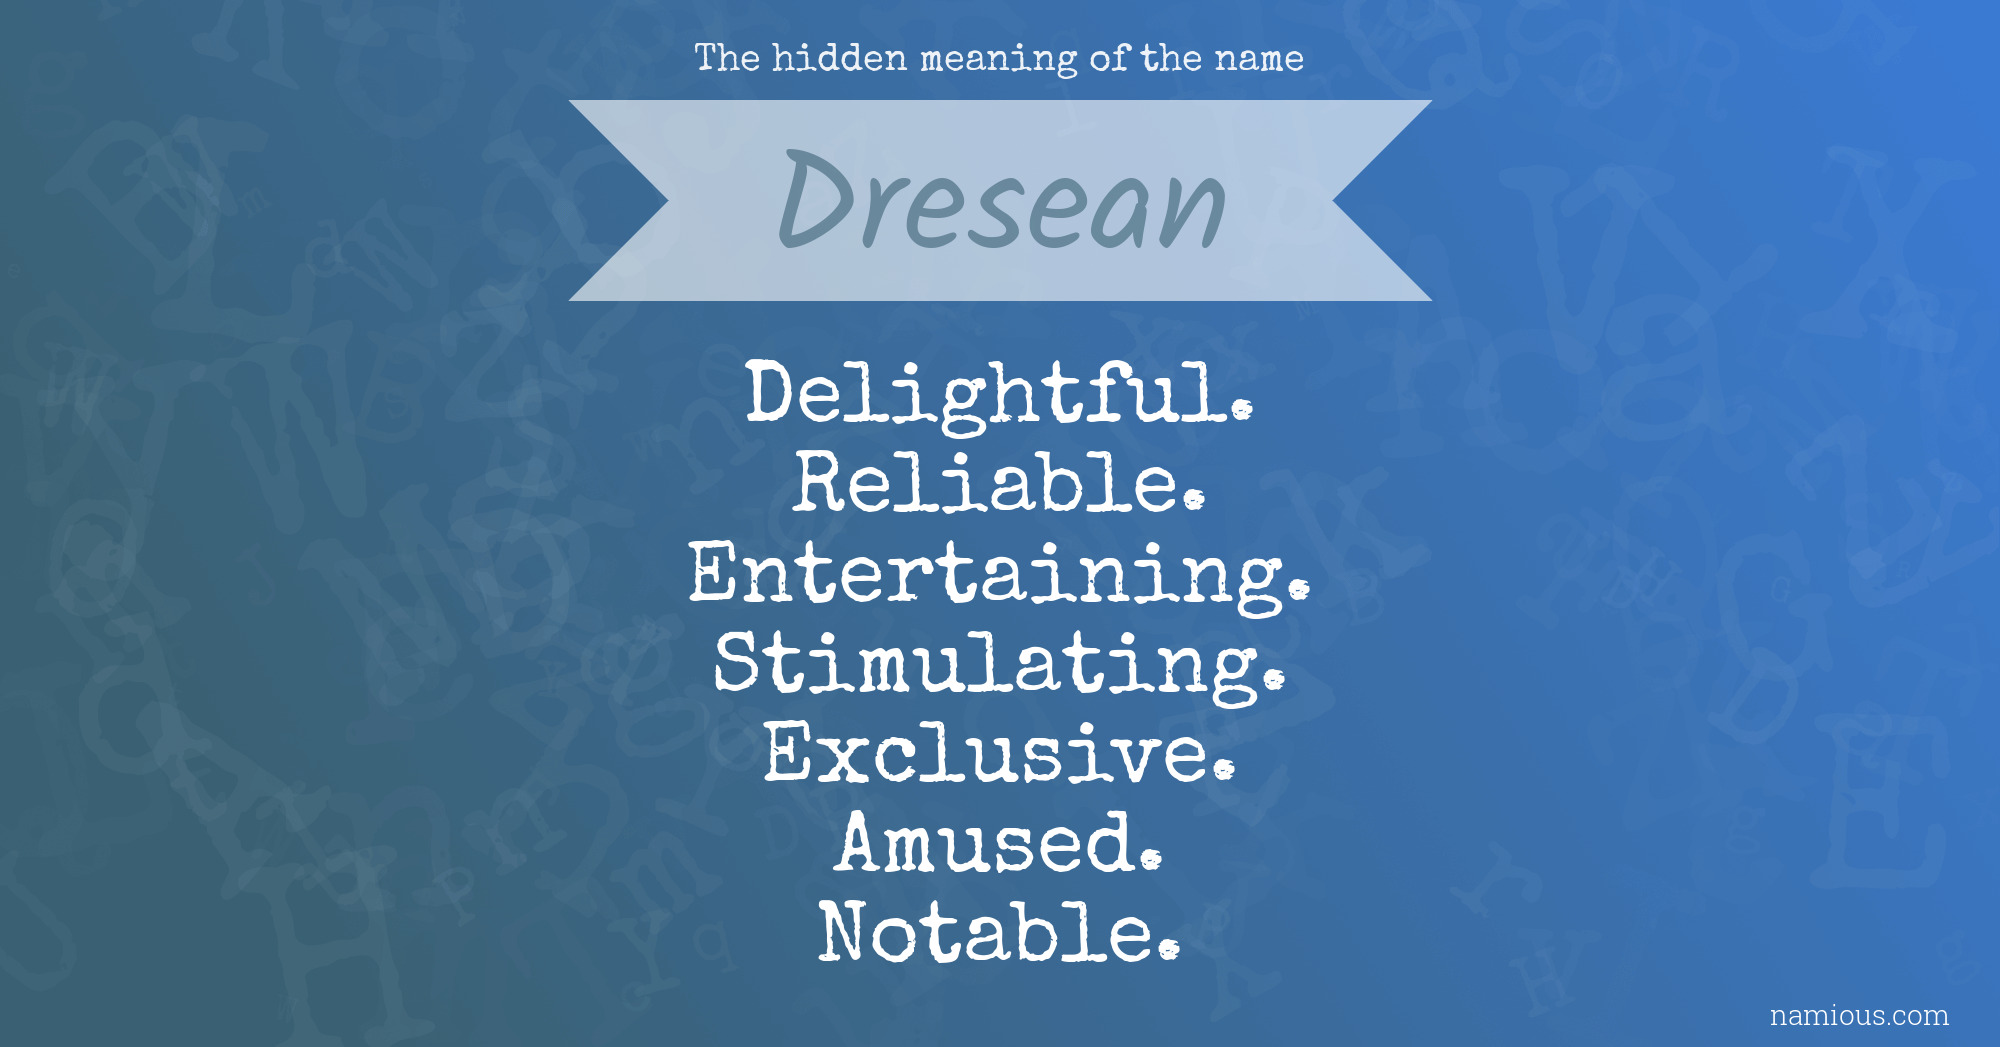 The hidden meaning of the name Dresean